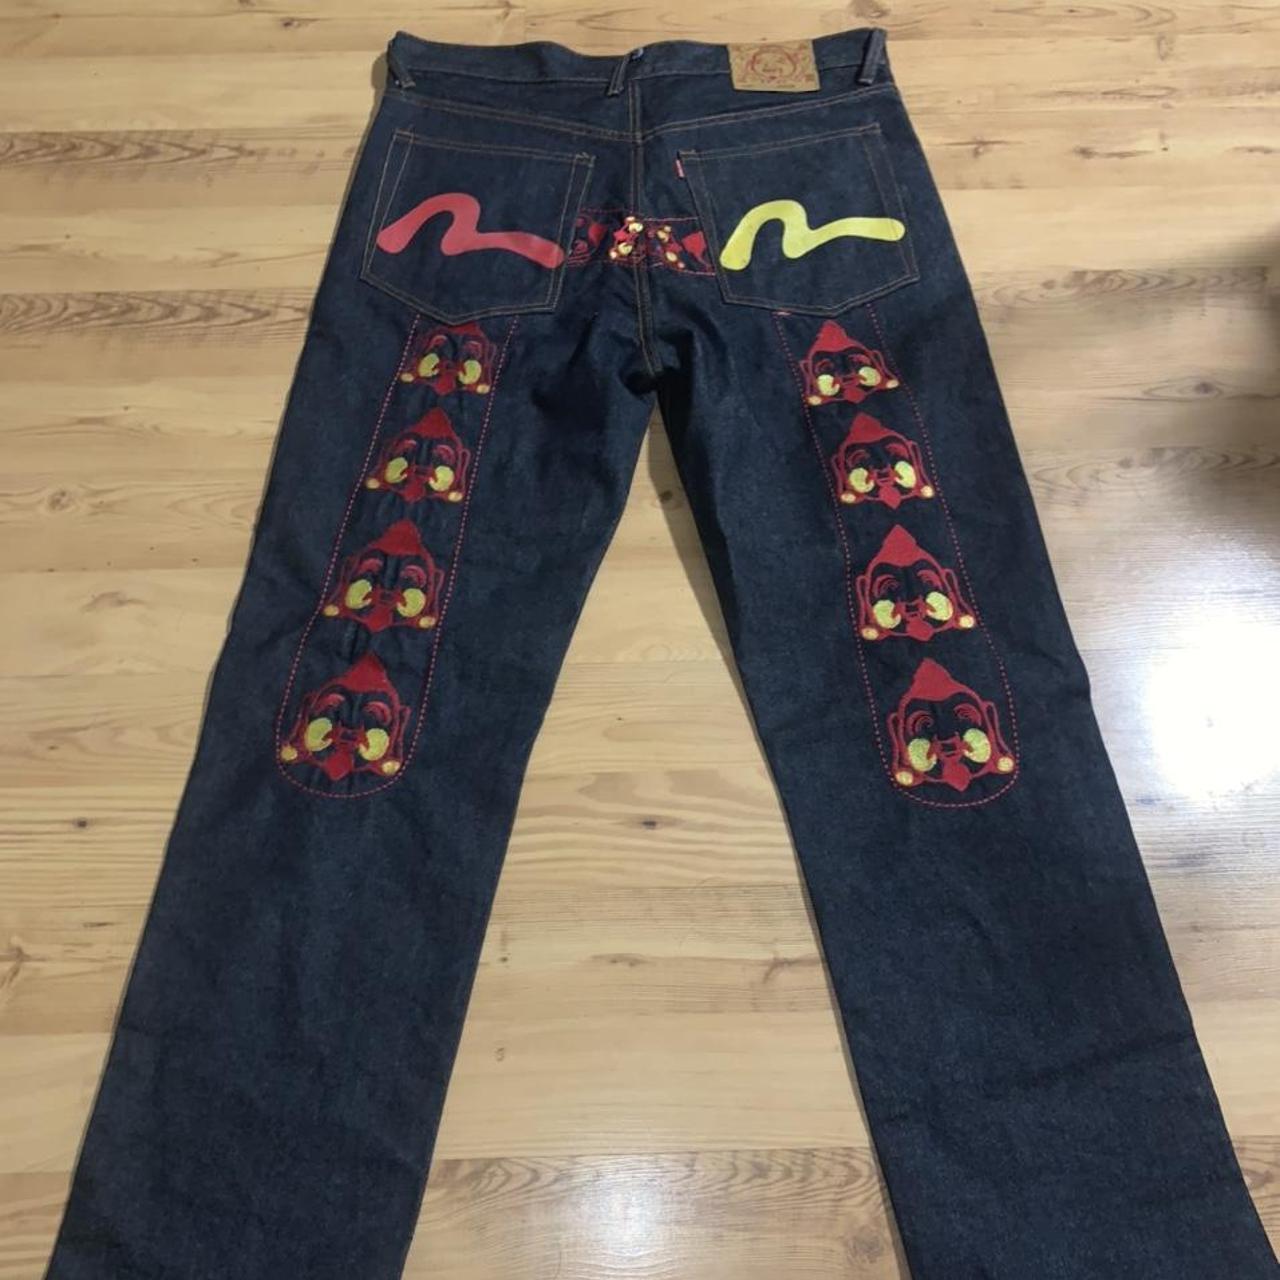 Rare Evisu print Jeans. Red and yellow stitching is